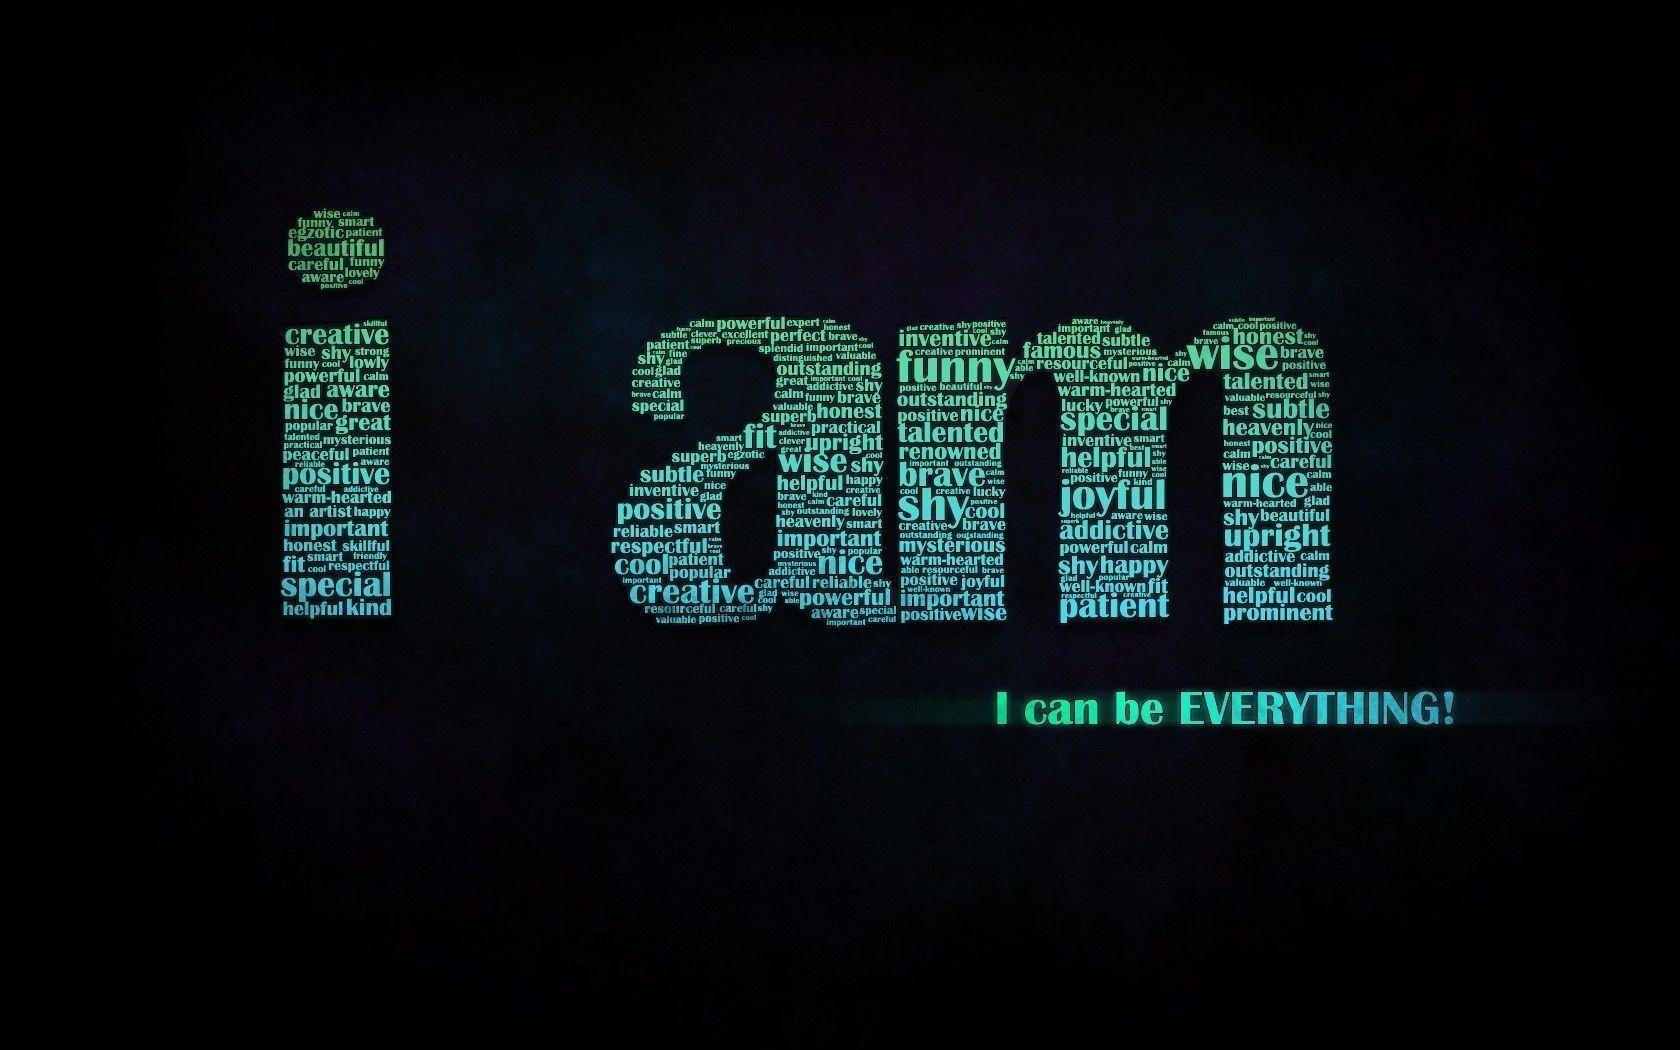 What follows these two powerful words are most important. #i #am